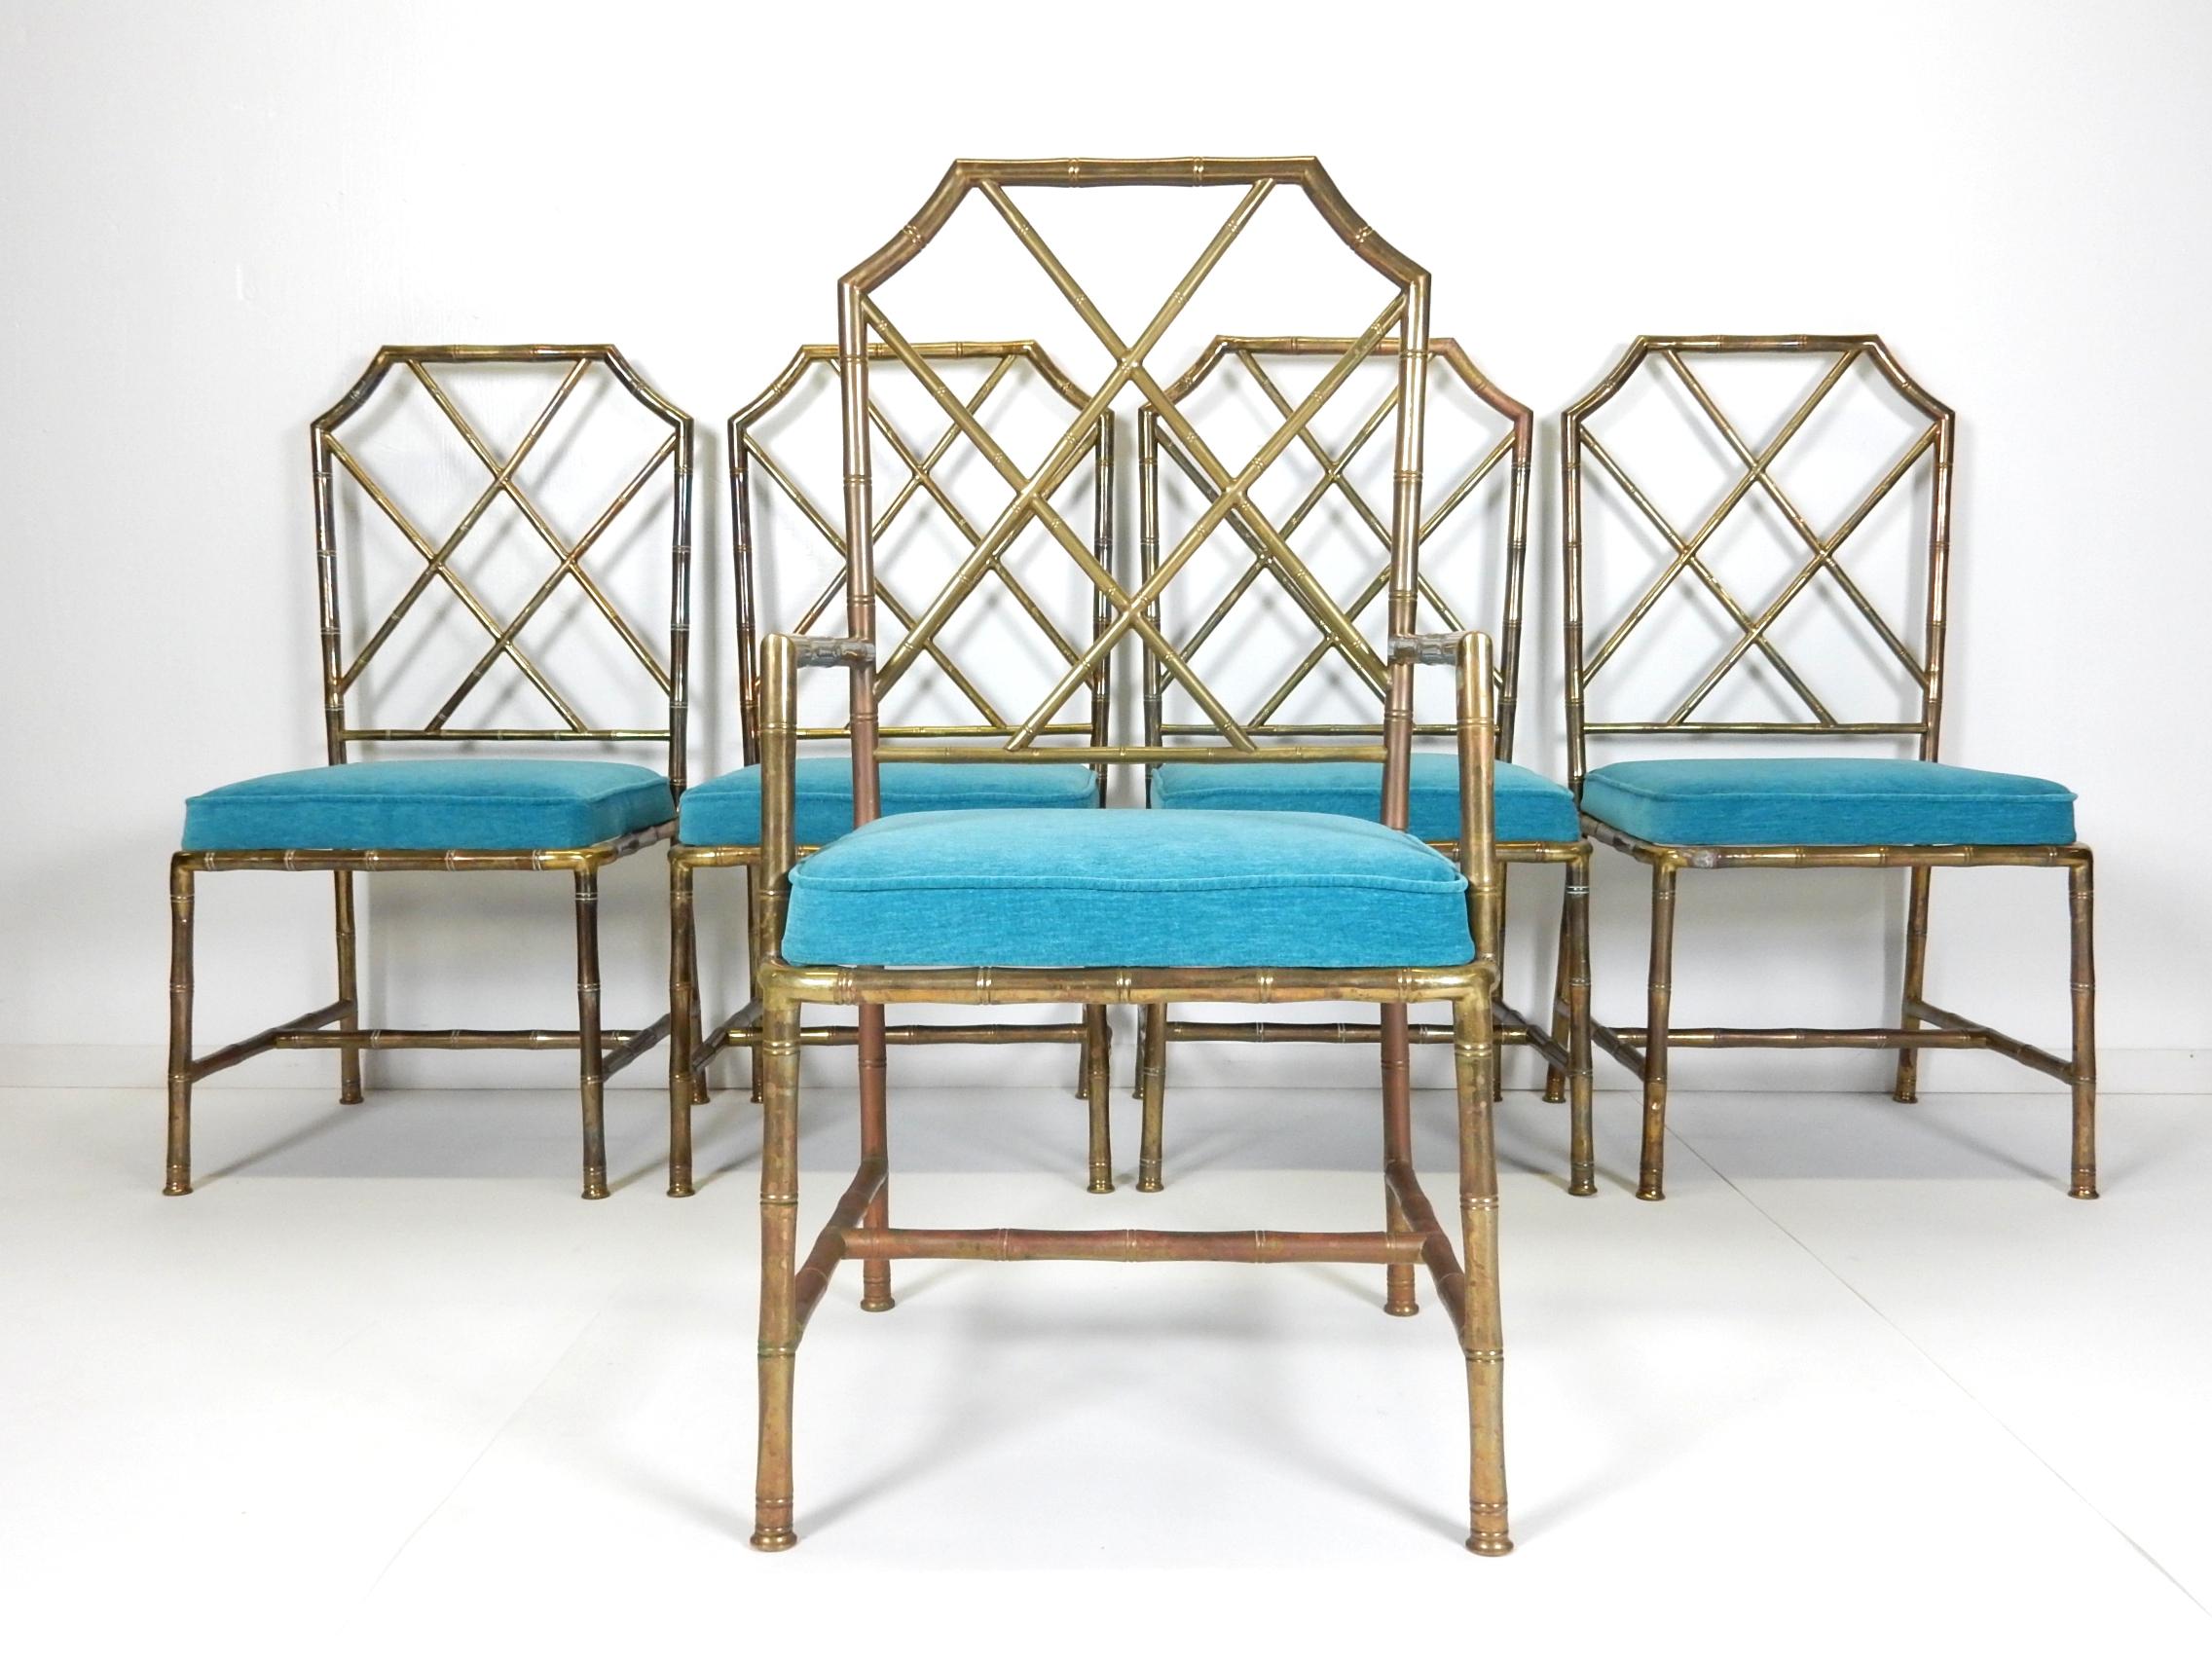 Set of 5 (one arm and four sides) faux bamboo brass dining chairs
with new teal upholstered seat cushions.
Chippendale style design, circa 1970s.
Lots of age and tarnish on brass.